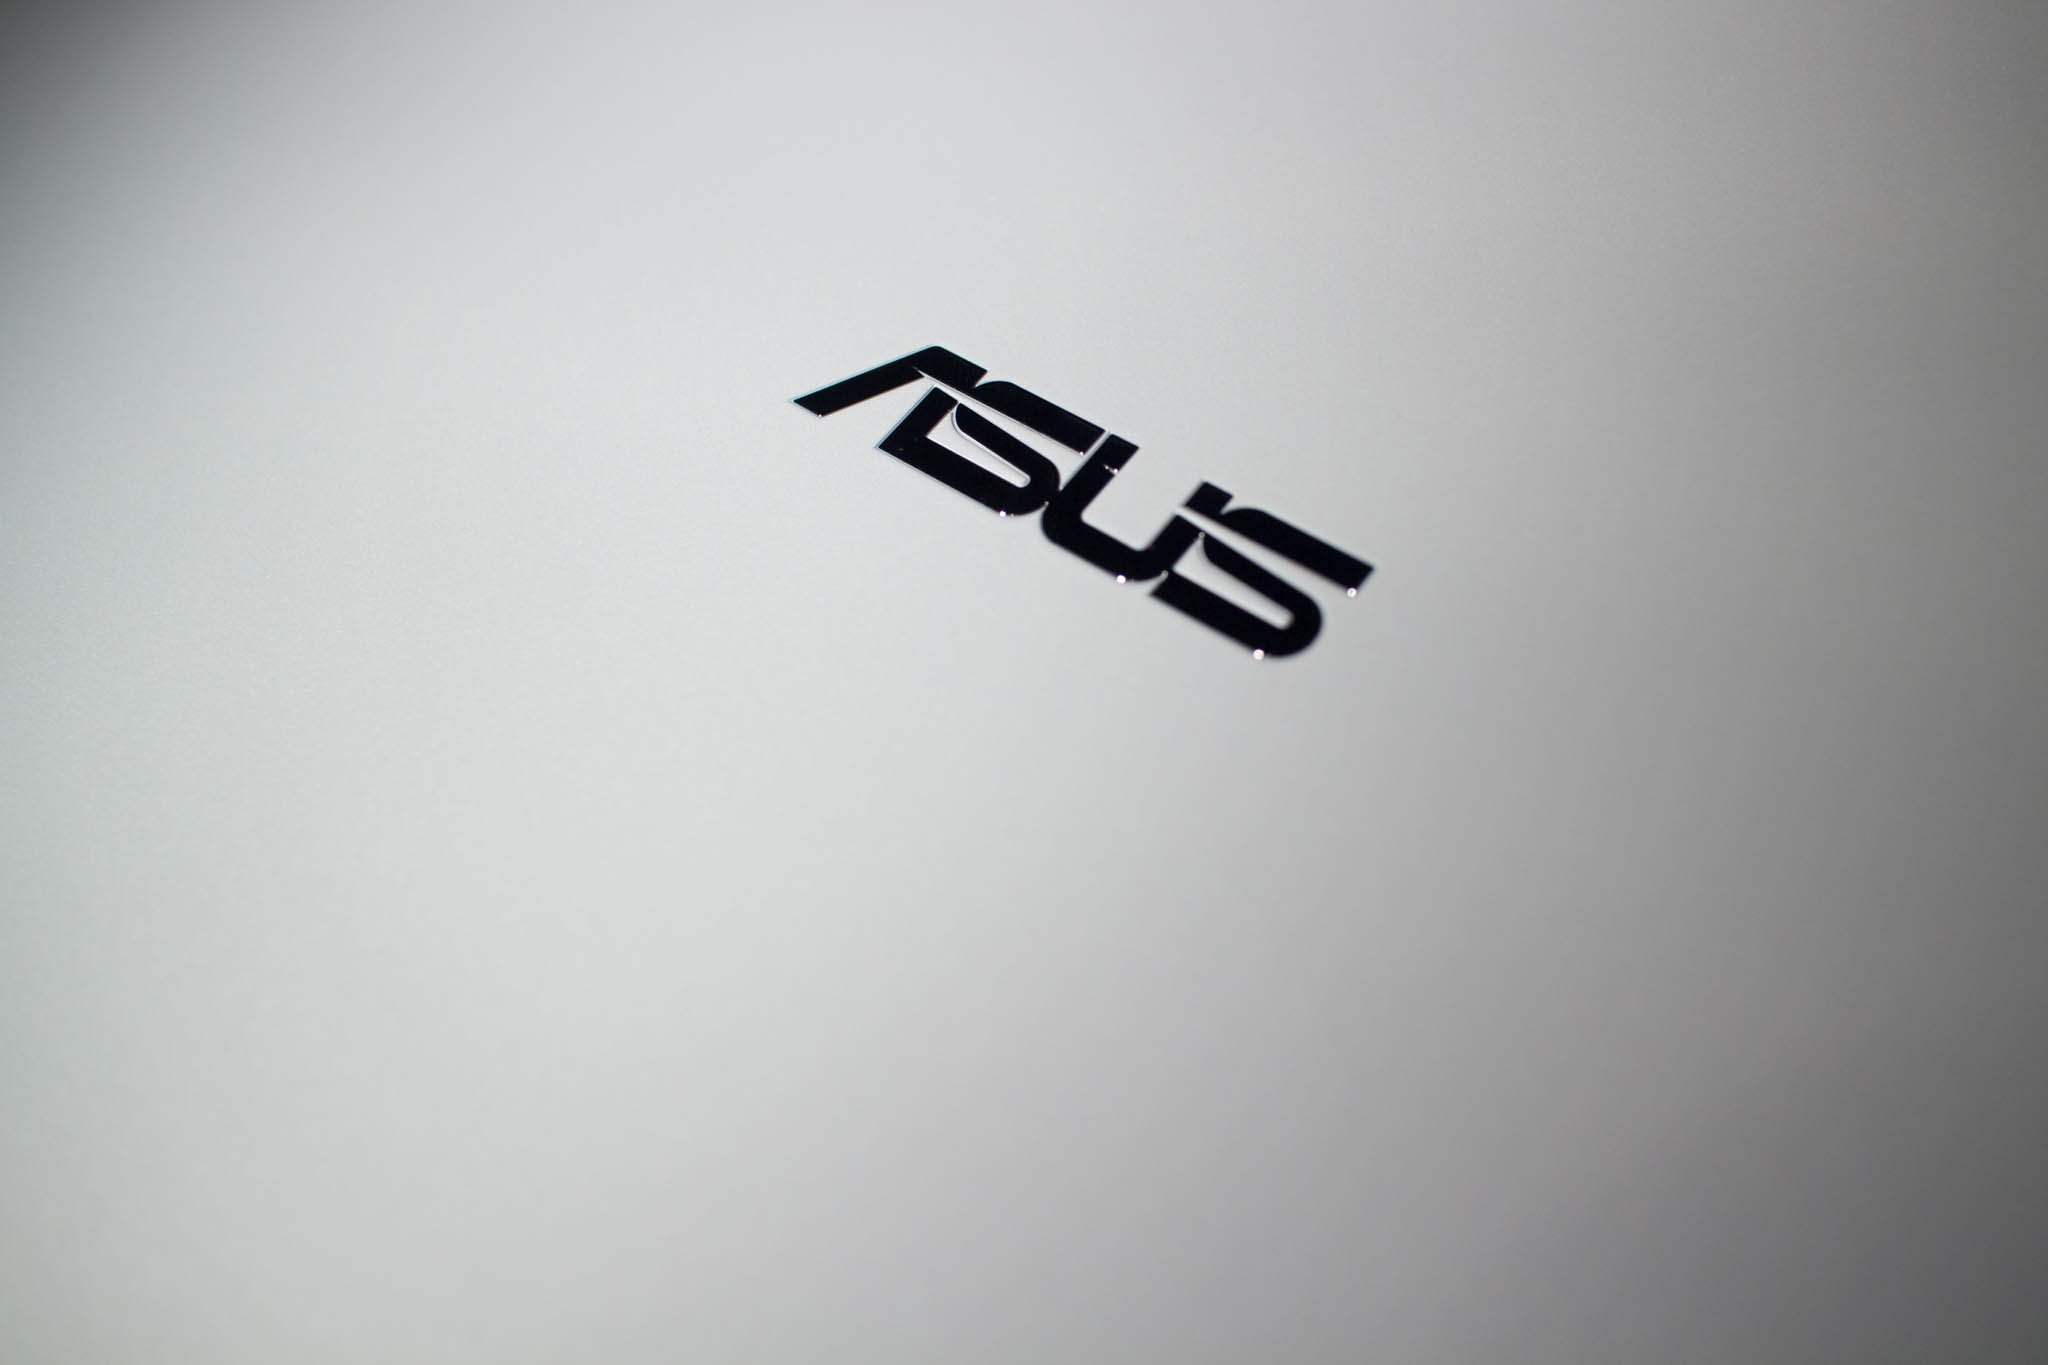 Asus Zenbook Pro UX305 limited edition